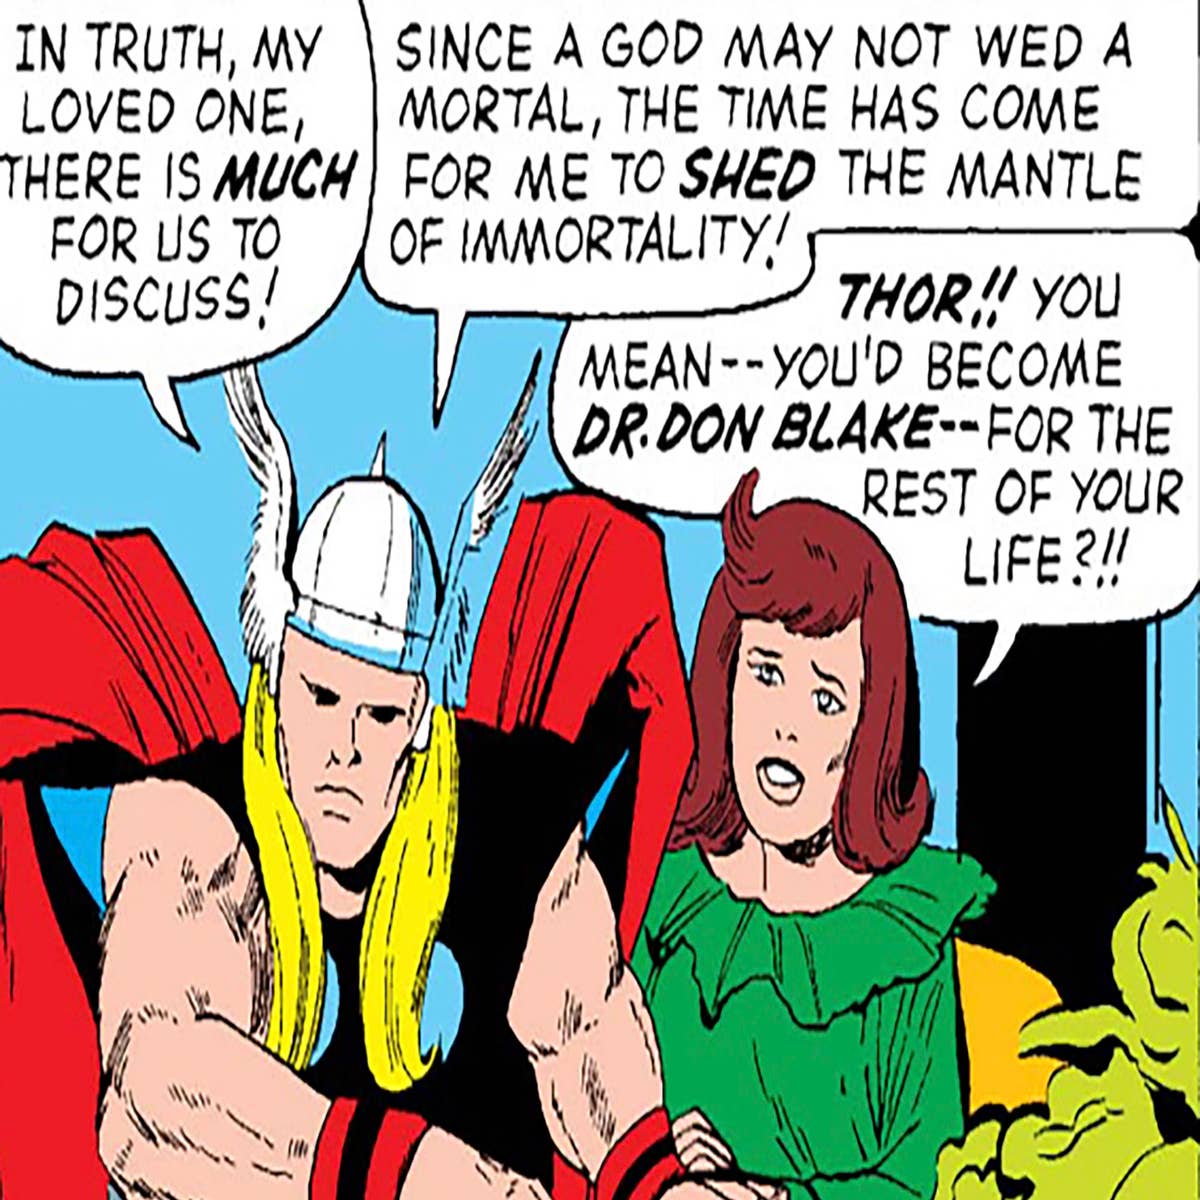 THOR on X: Imagine getting married and your tit falls out your